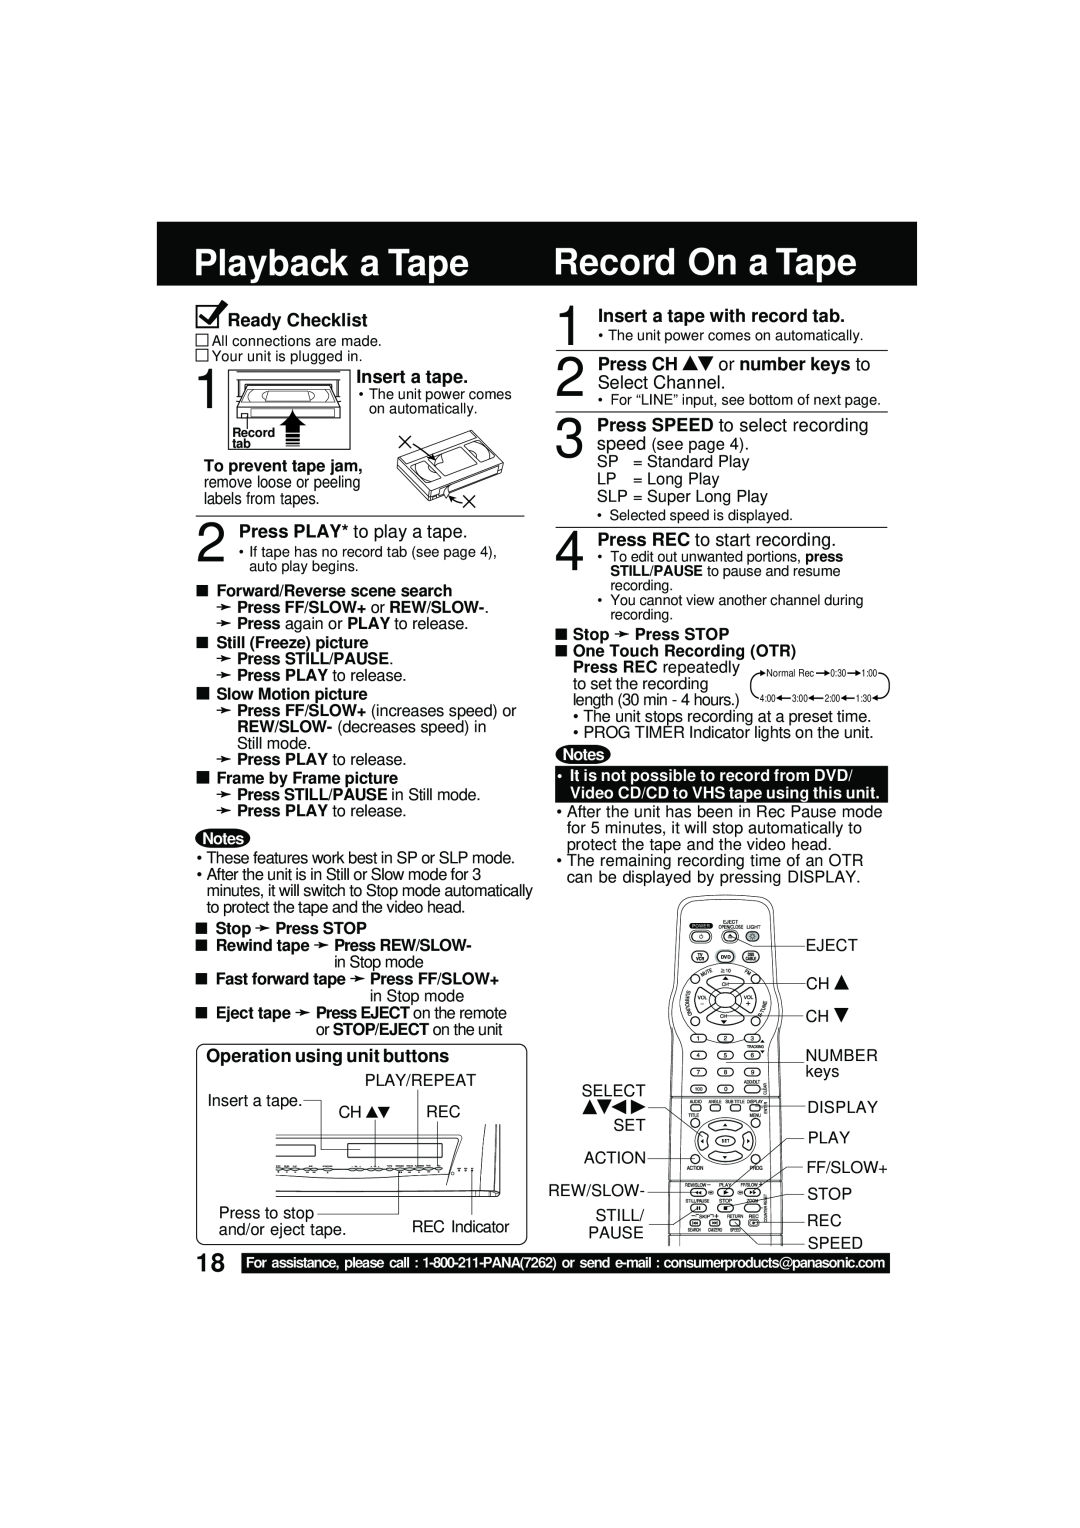 Panasonic PV DM2092 3 SP, Playback a Tape, Record On a Tape, Ready Checklist, Insert a tape, Press PLAY* to play a tape 